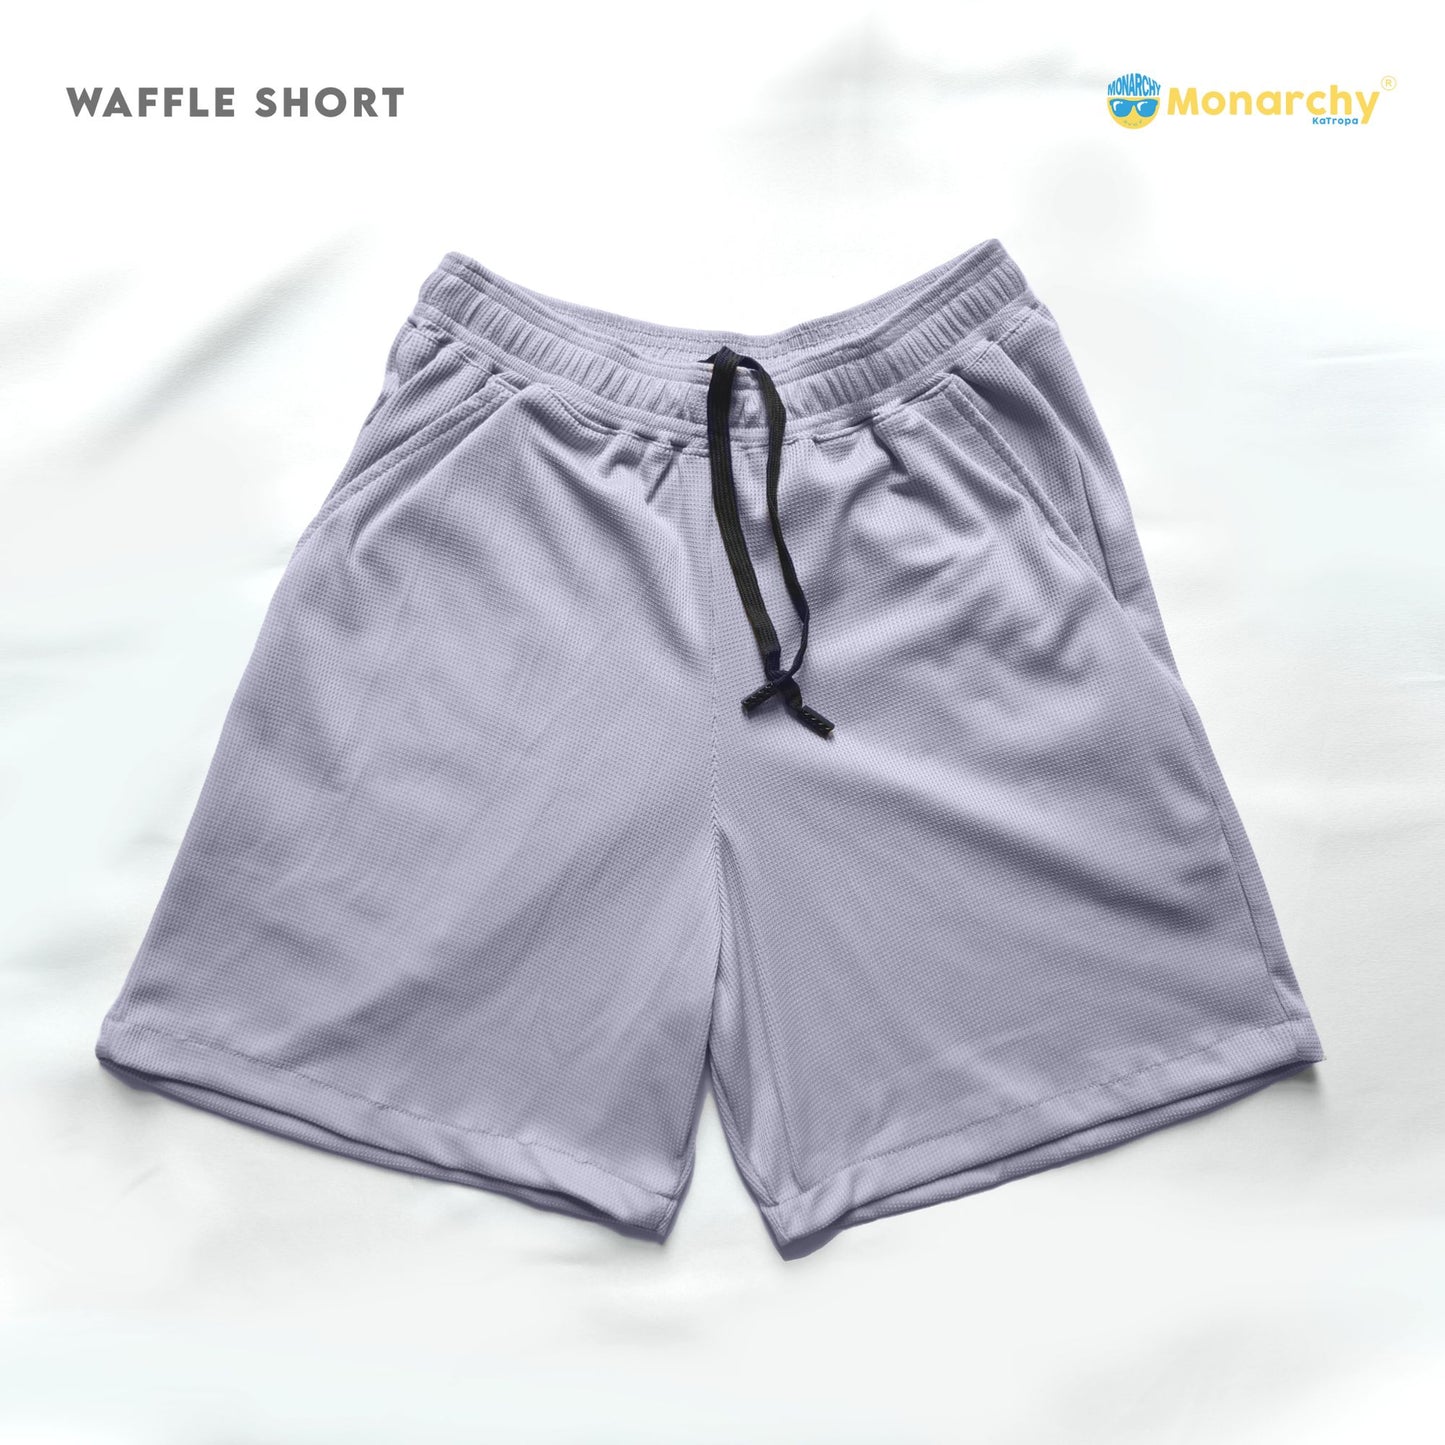 Monarchy Official TOSHI Above The Knee Waffle Short For Men Good Quality Casual